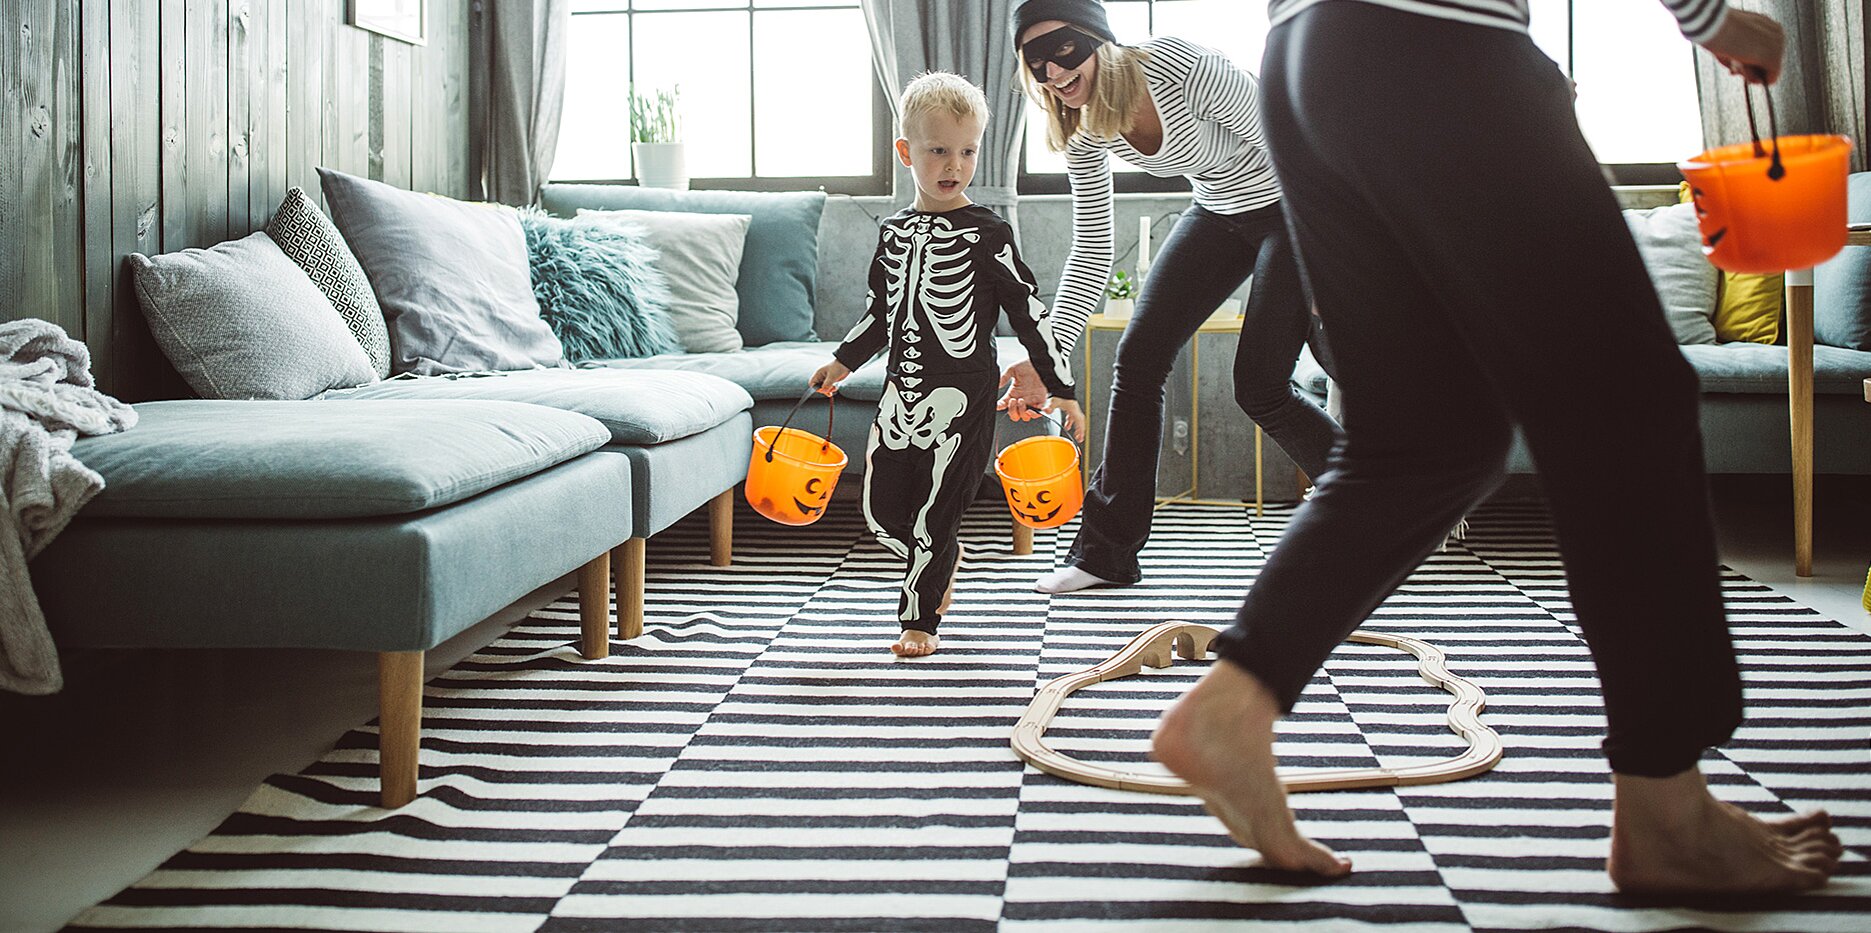 11 Fun Family Activities to Do When Trick-or-Treating Is Canceled